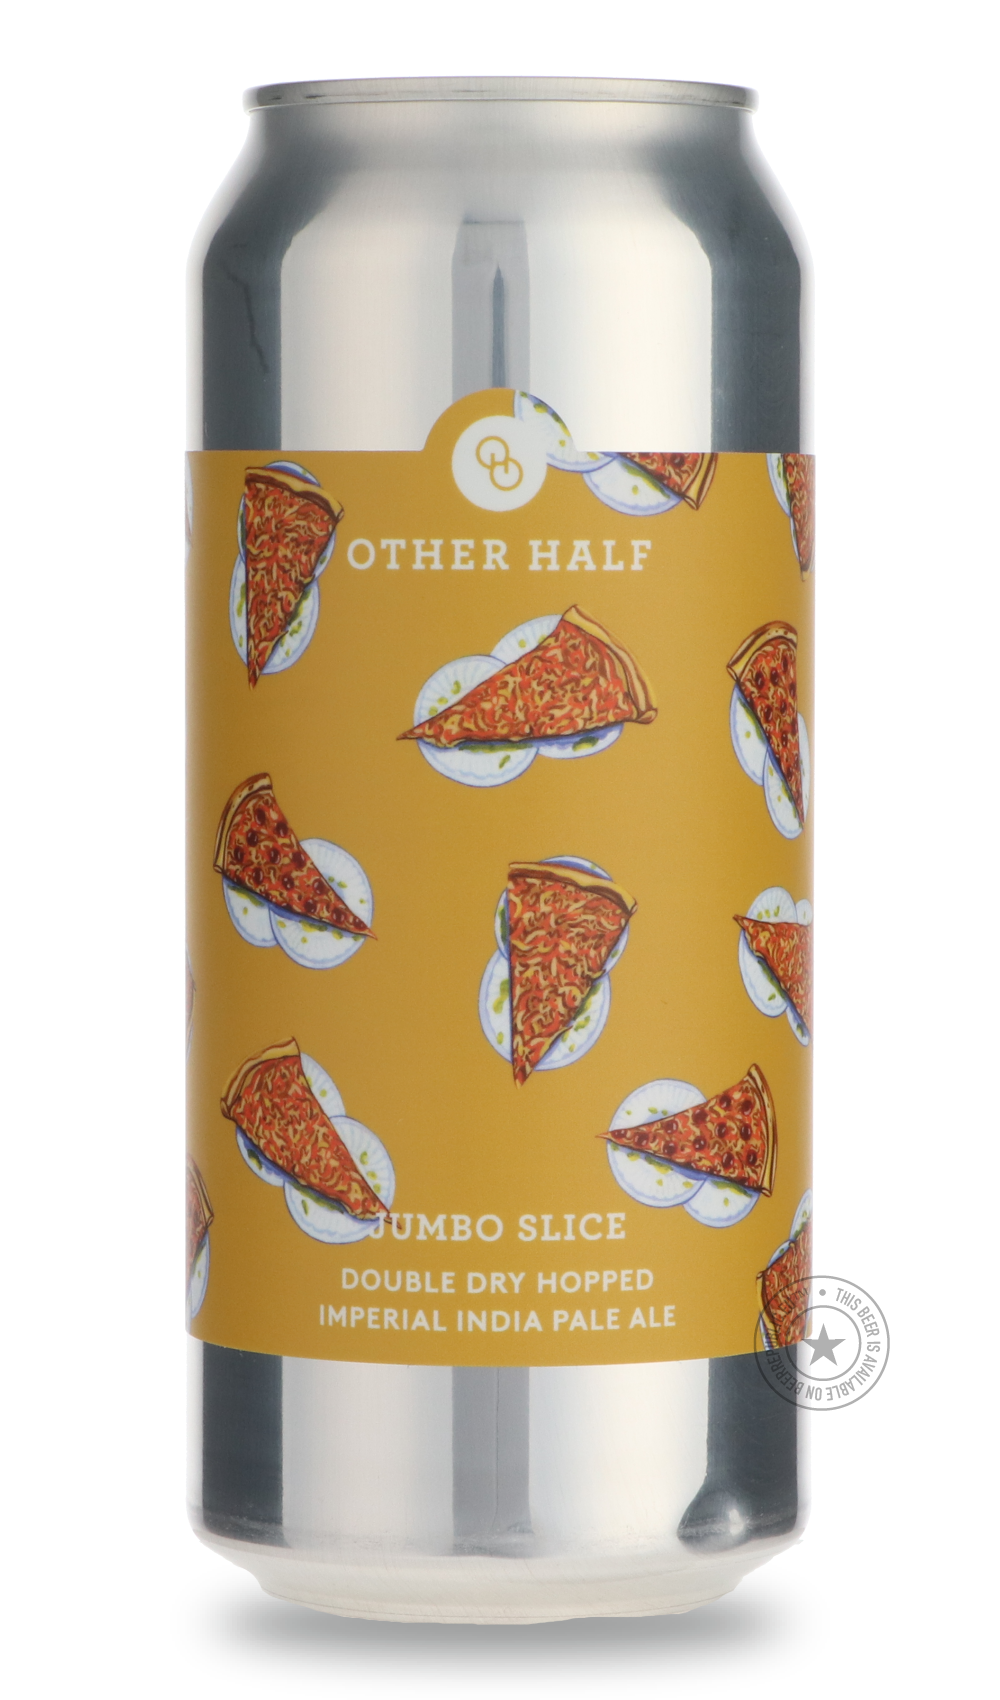 -Other Half- Jumbo Slice-IPA- Only @ Beer Republic - The best online beer store for American & Canadian craft beer - Buy beer online from the USA and Canada - Bier online kopen - Amerikaans bier kopen - Craft beer store - Craft beer kopen - Amerikanisch bier kaufen - Bier online kaufen - Acheter biere online - IPA - Stout - Porter - New England IPA - Hazy IPA - Imperial Stout - Barrel Aged - Barrel Aged Imperial Stout - Brown - Dark beer - Blond - Blonde - Pilsner - Lager - Wheat - Weizen - Amber - Barley W